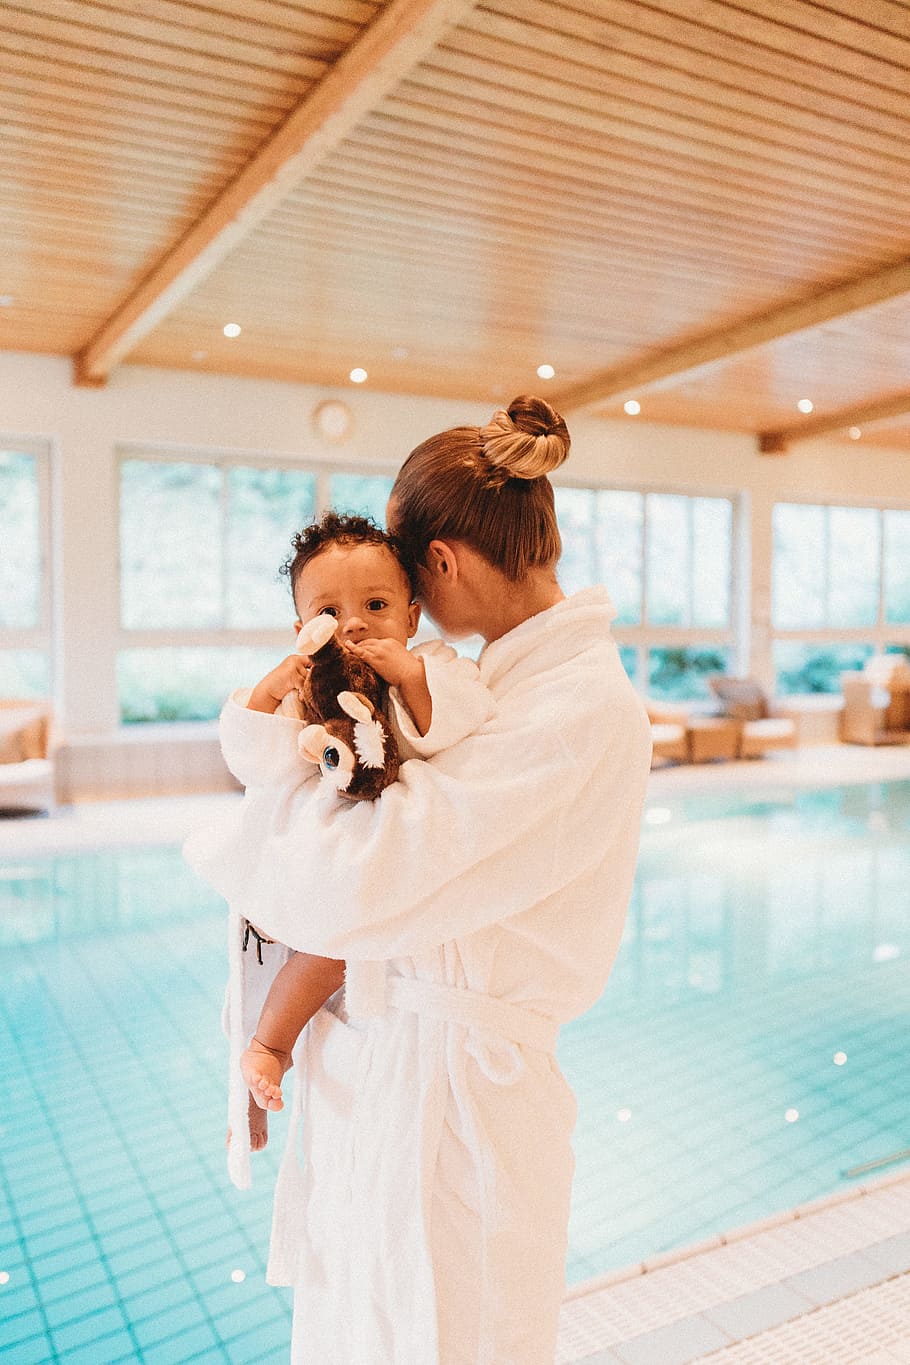 woman wearing white robe carrying baby, quality time, family time